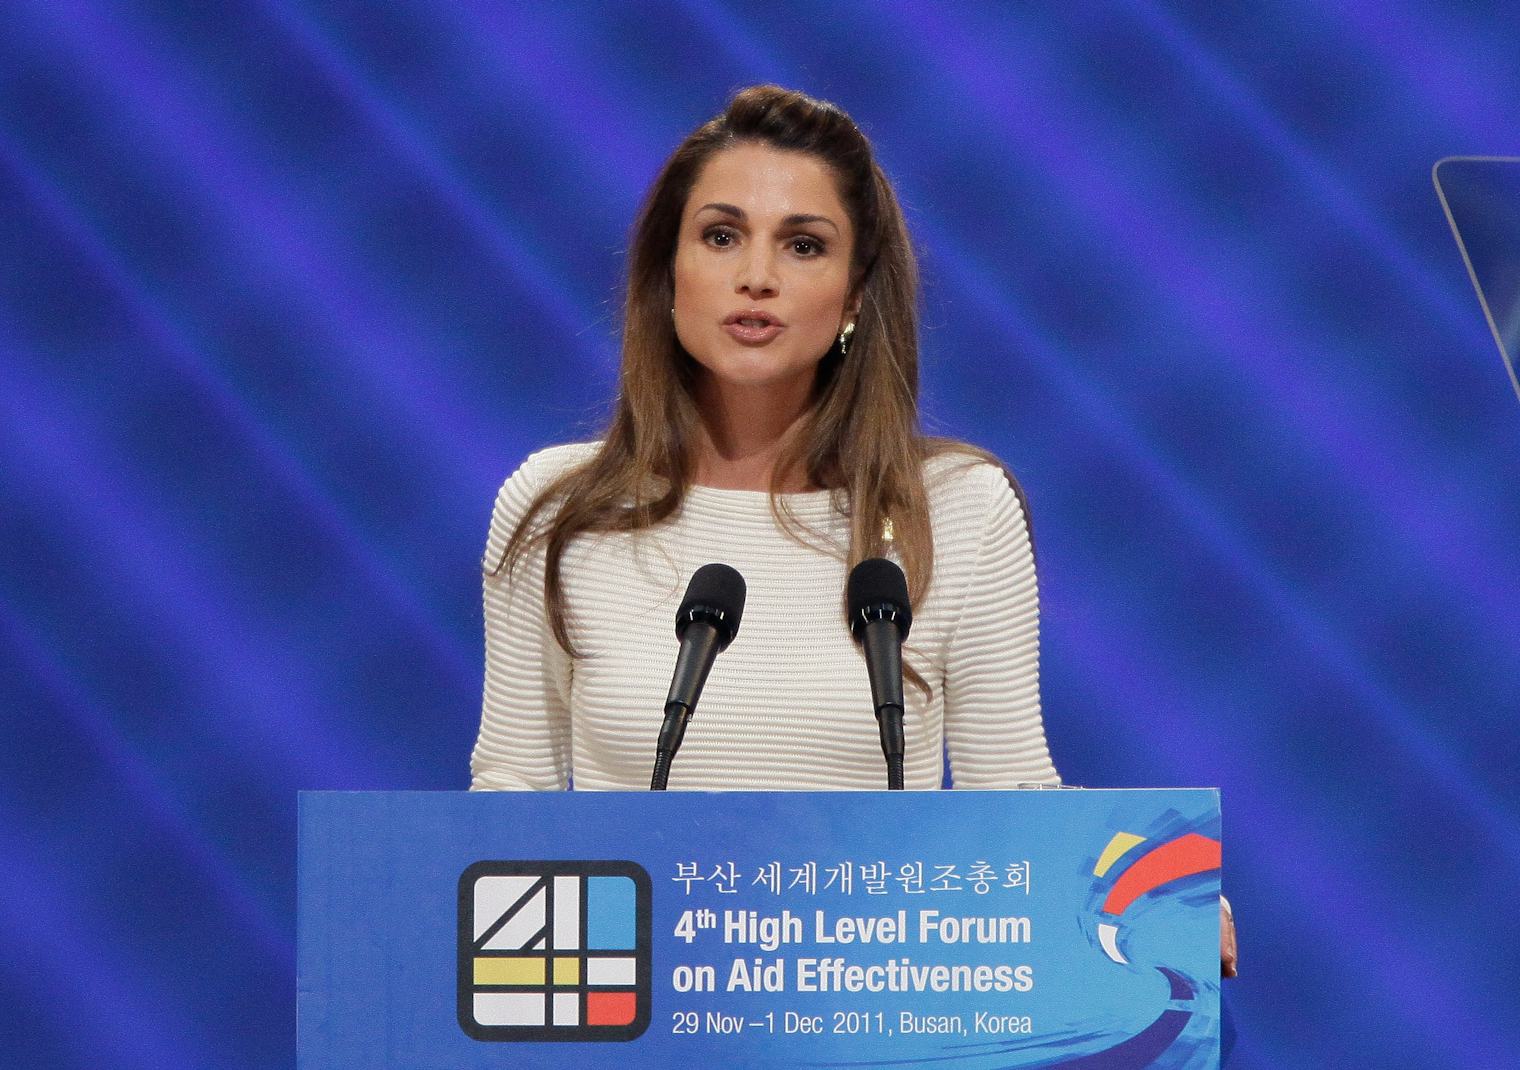 Jordans Queen Rania Is On Twitter Facebook And Instagram And Believes Social Media Can Fight